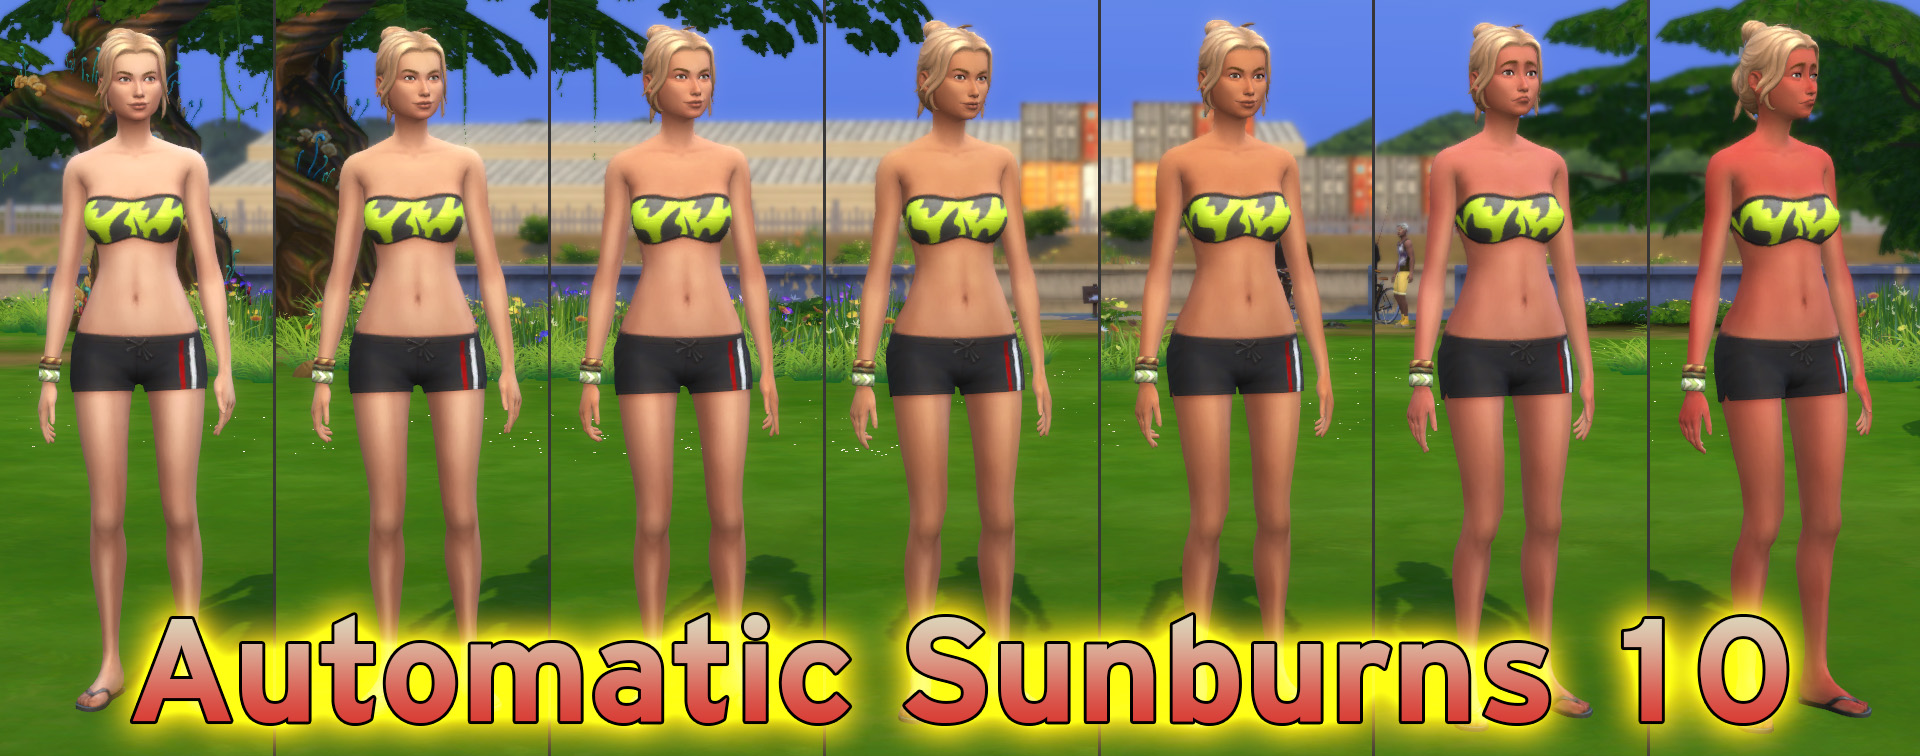 This One Mod Will Have You Pausing The Sims 4 80% Less!👀 in 2023